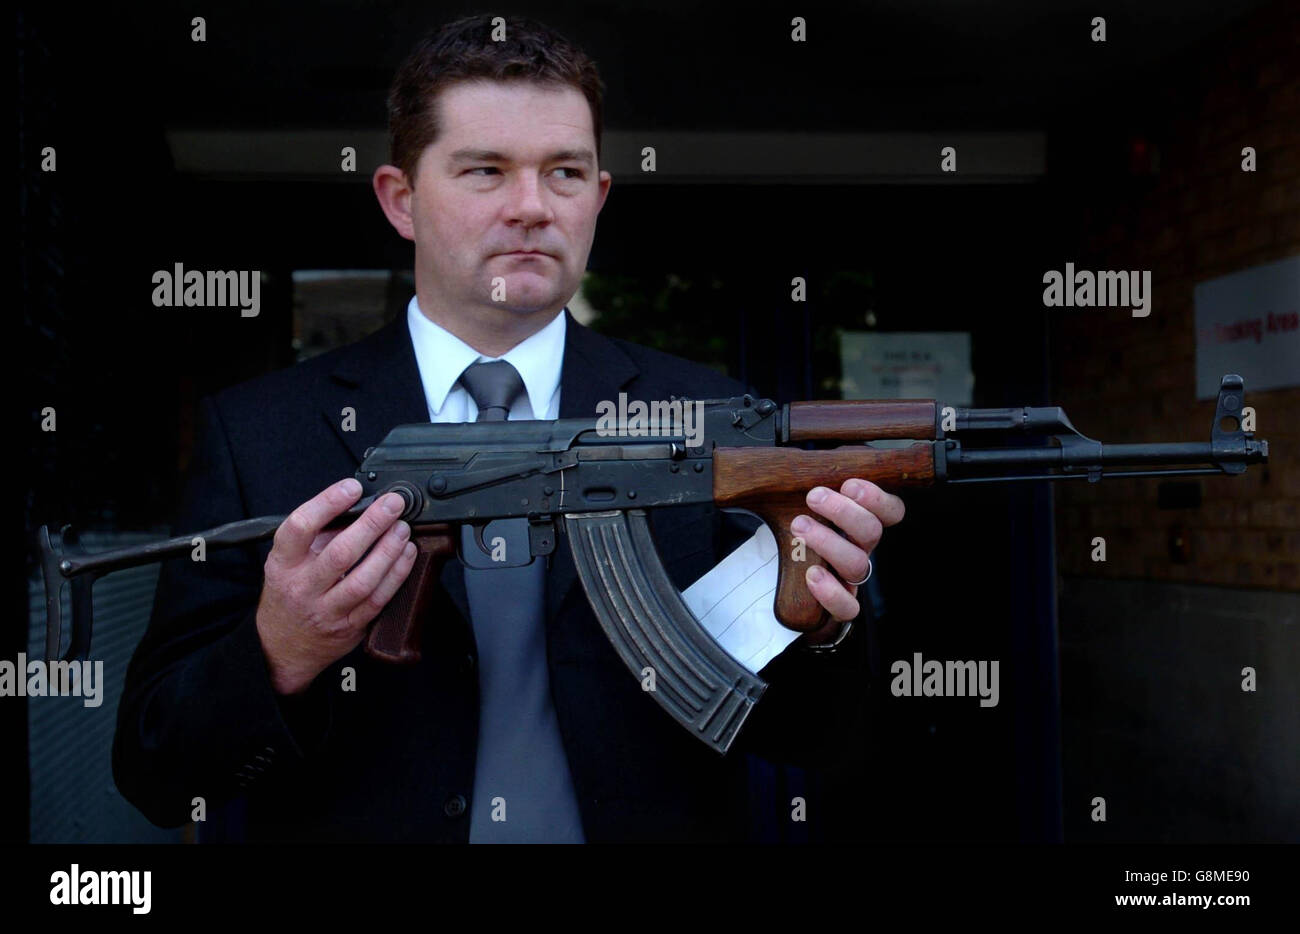 Detective Inspector Paul Maghie, from Hertfordshire Police, holds an AK 47 Kalashnikov rifle outside Luton Crown Court, similar to the one used in the murder of David King as he left a gym in Hoddesdon, Hertfordshire, in October 2003. Two men were convicted by a jury at Luton Crown Court today of murdering minder King as he left the Hoddesdon gym. Stock Photo